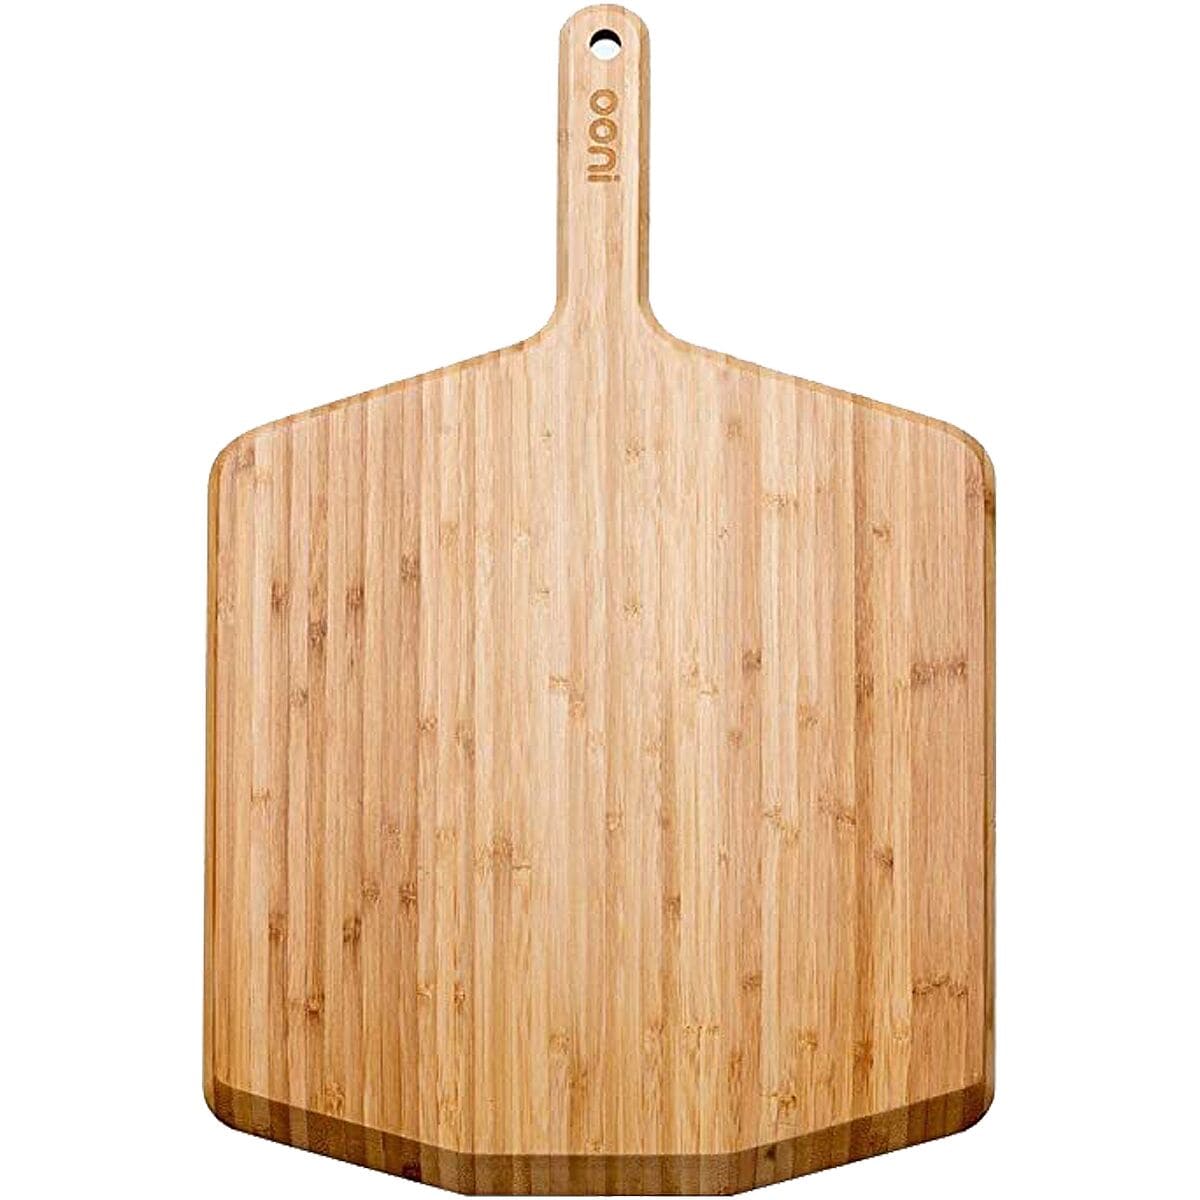 Ooni 16in Bamboo Pizza Peel & Serving Board